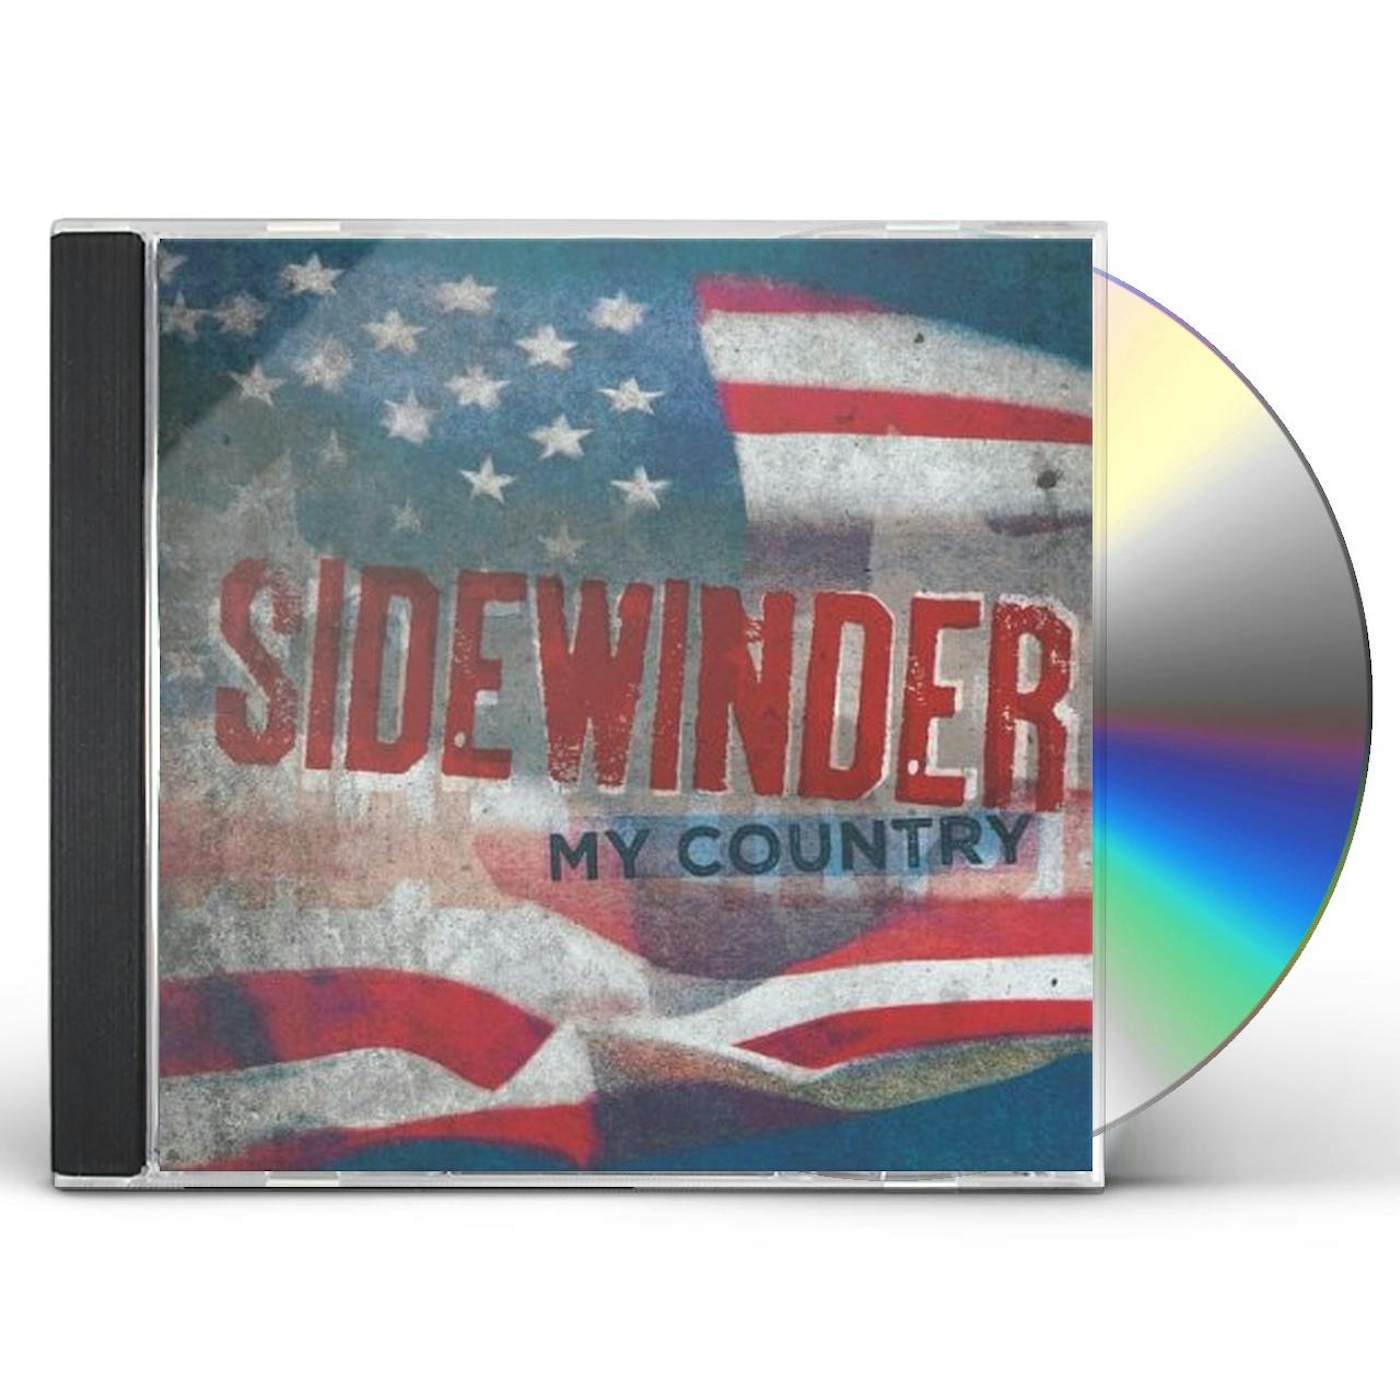 Sidewinder MY COUNTRY CD